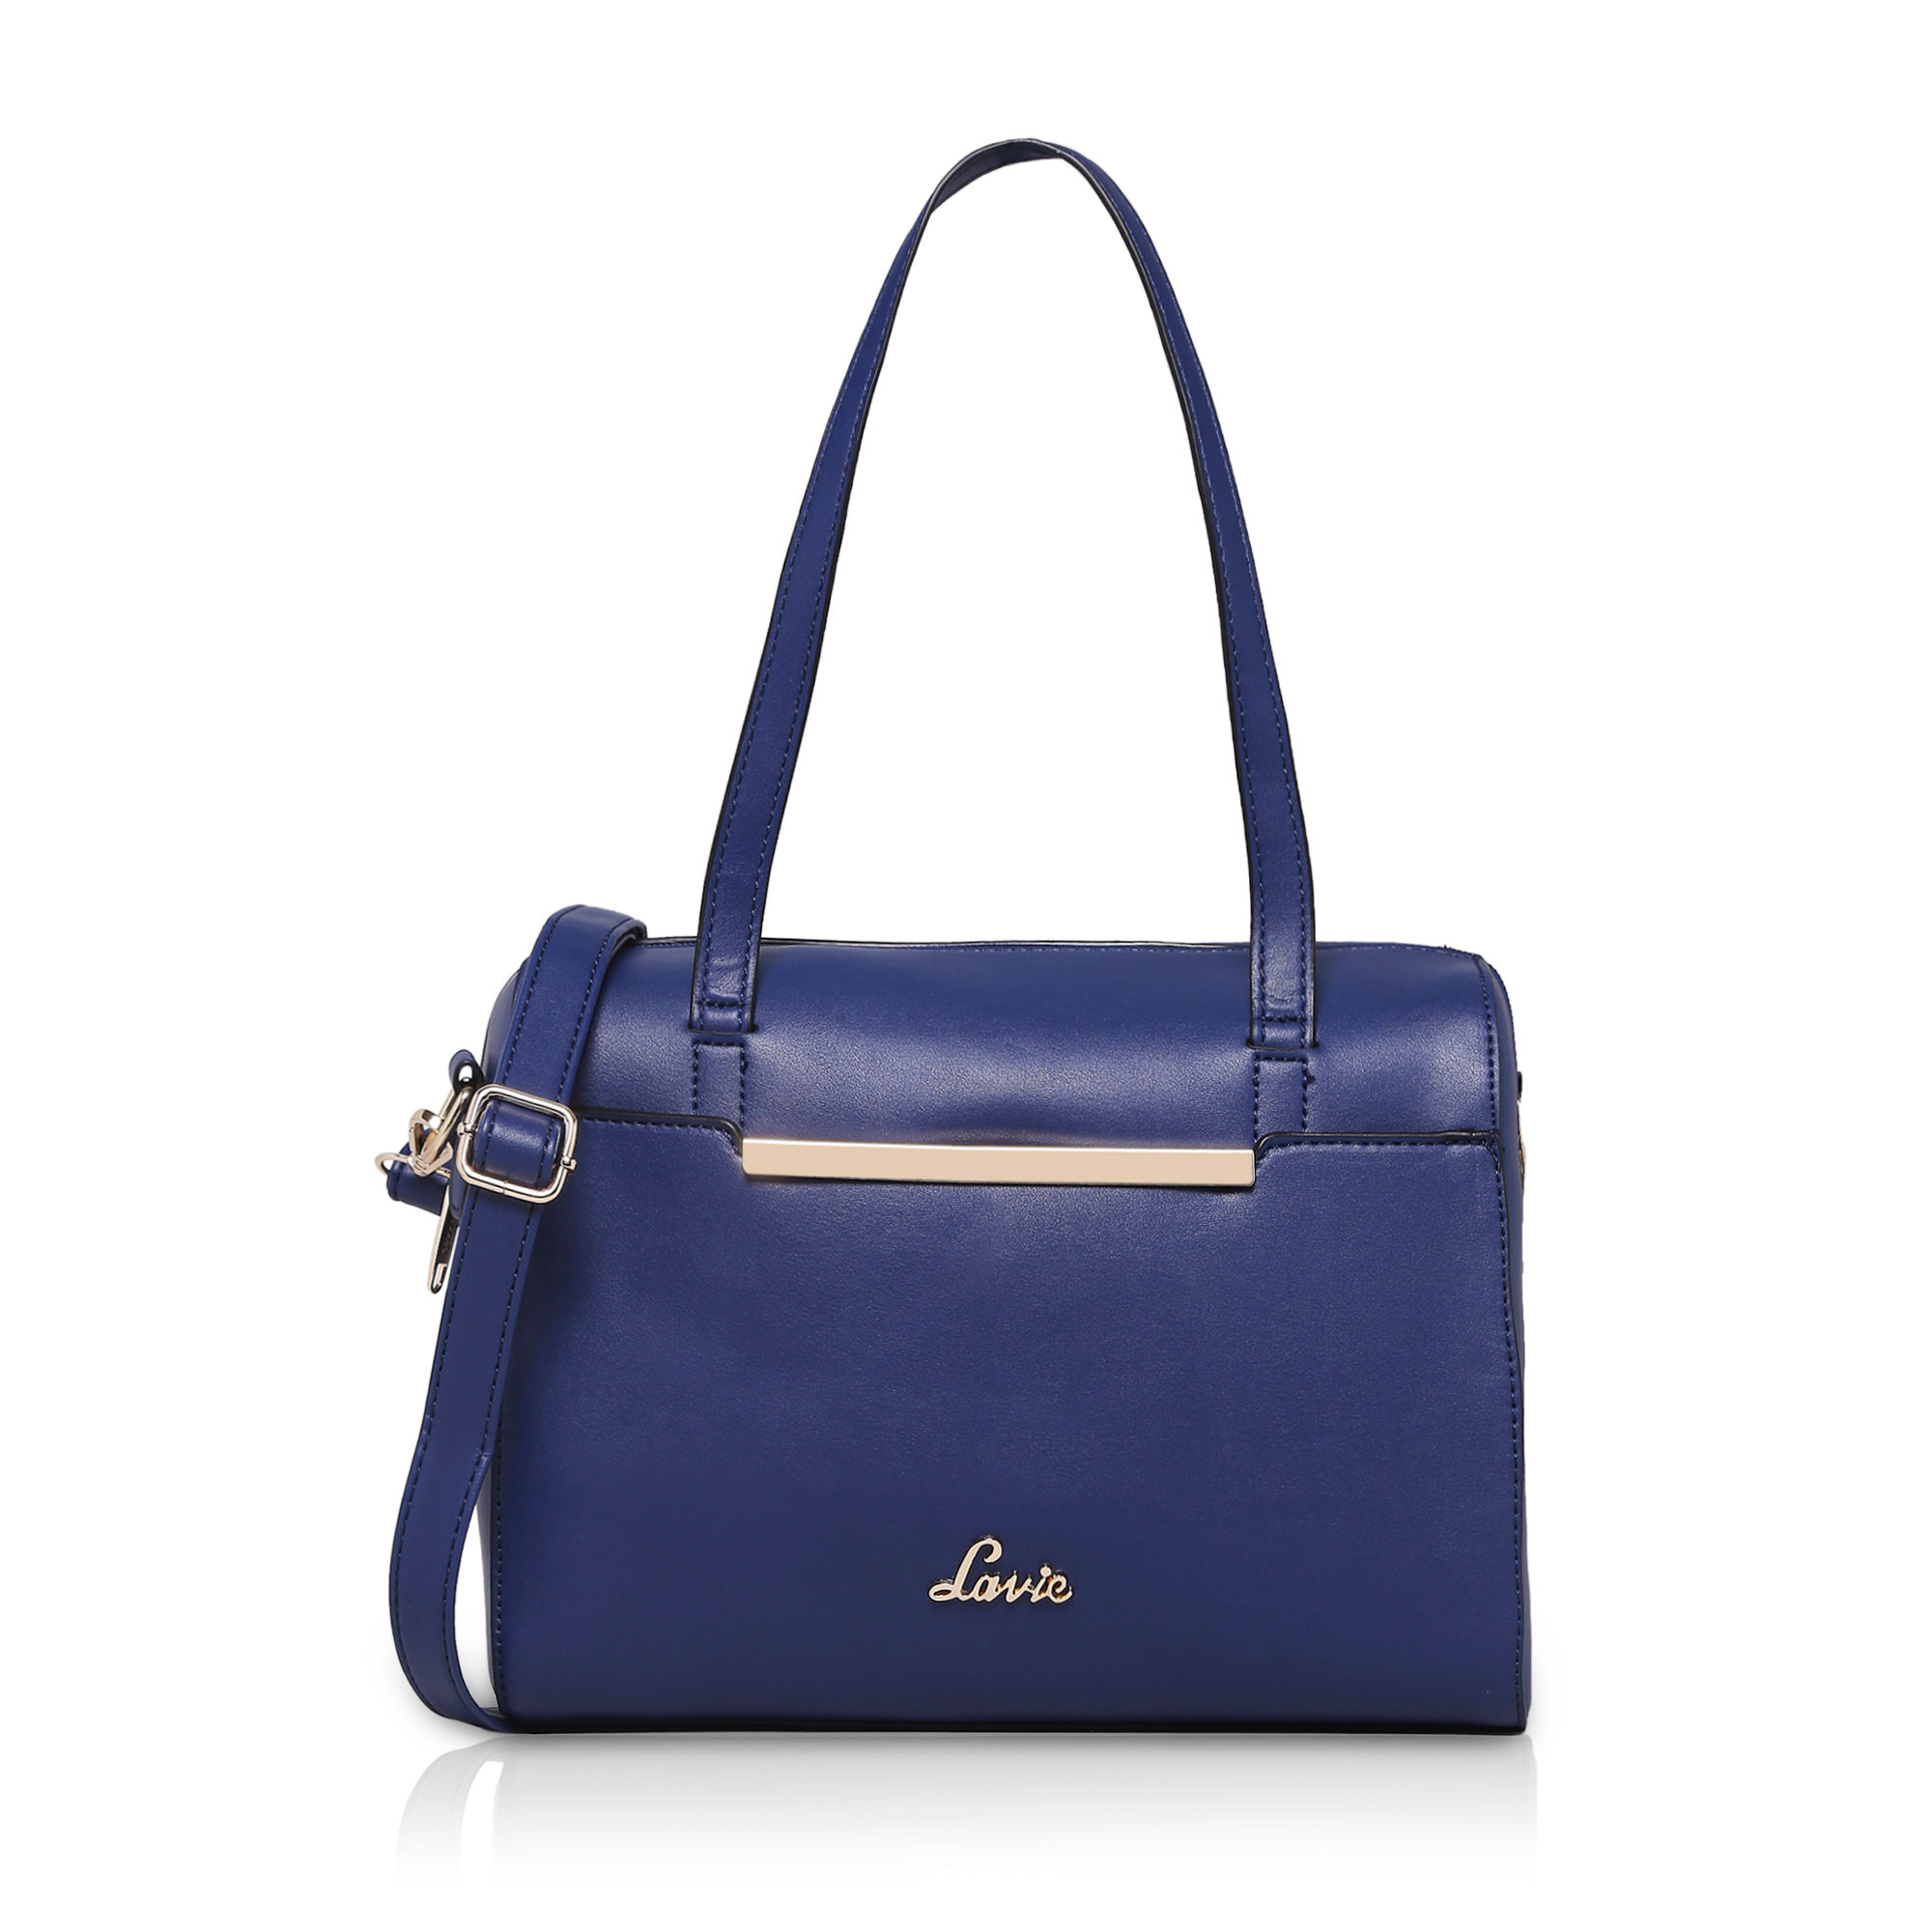 Buy Lavie Sling Bags Online at Affortable Prices in India - Myntra